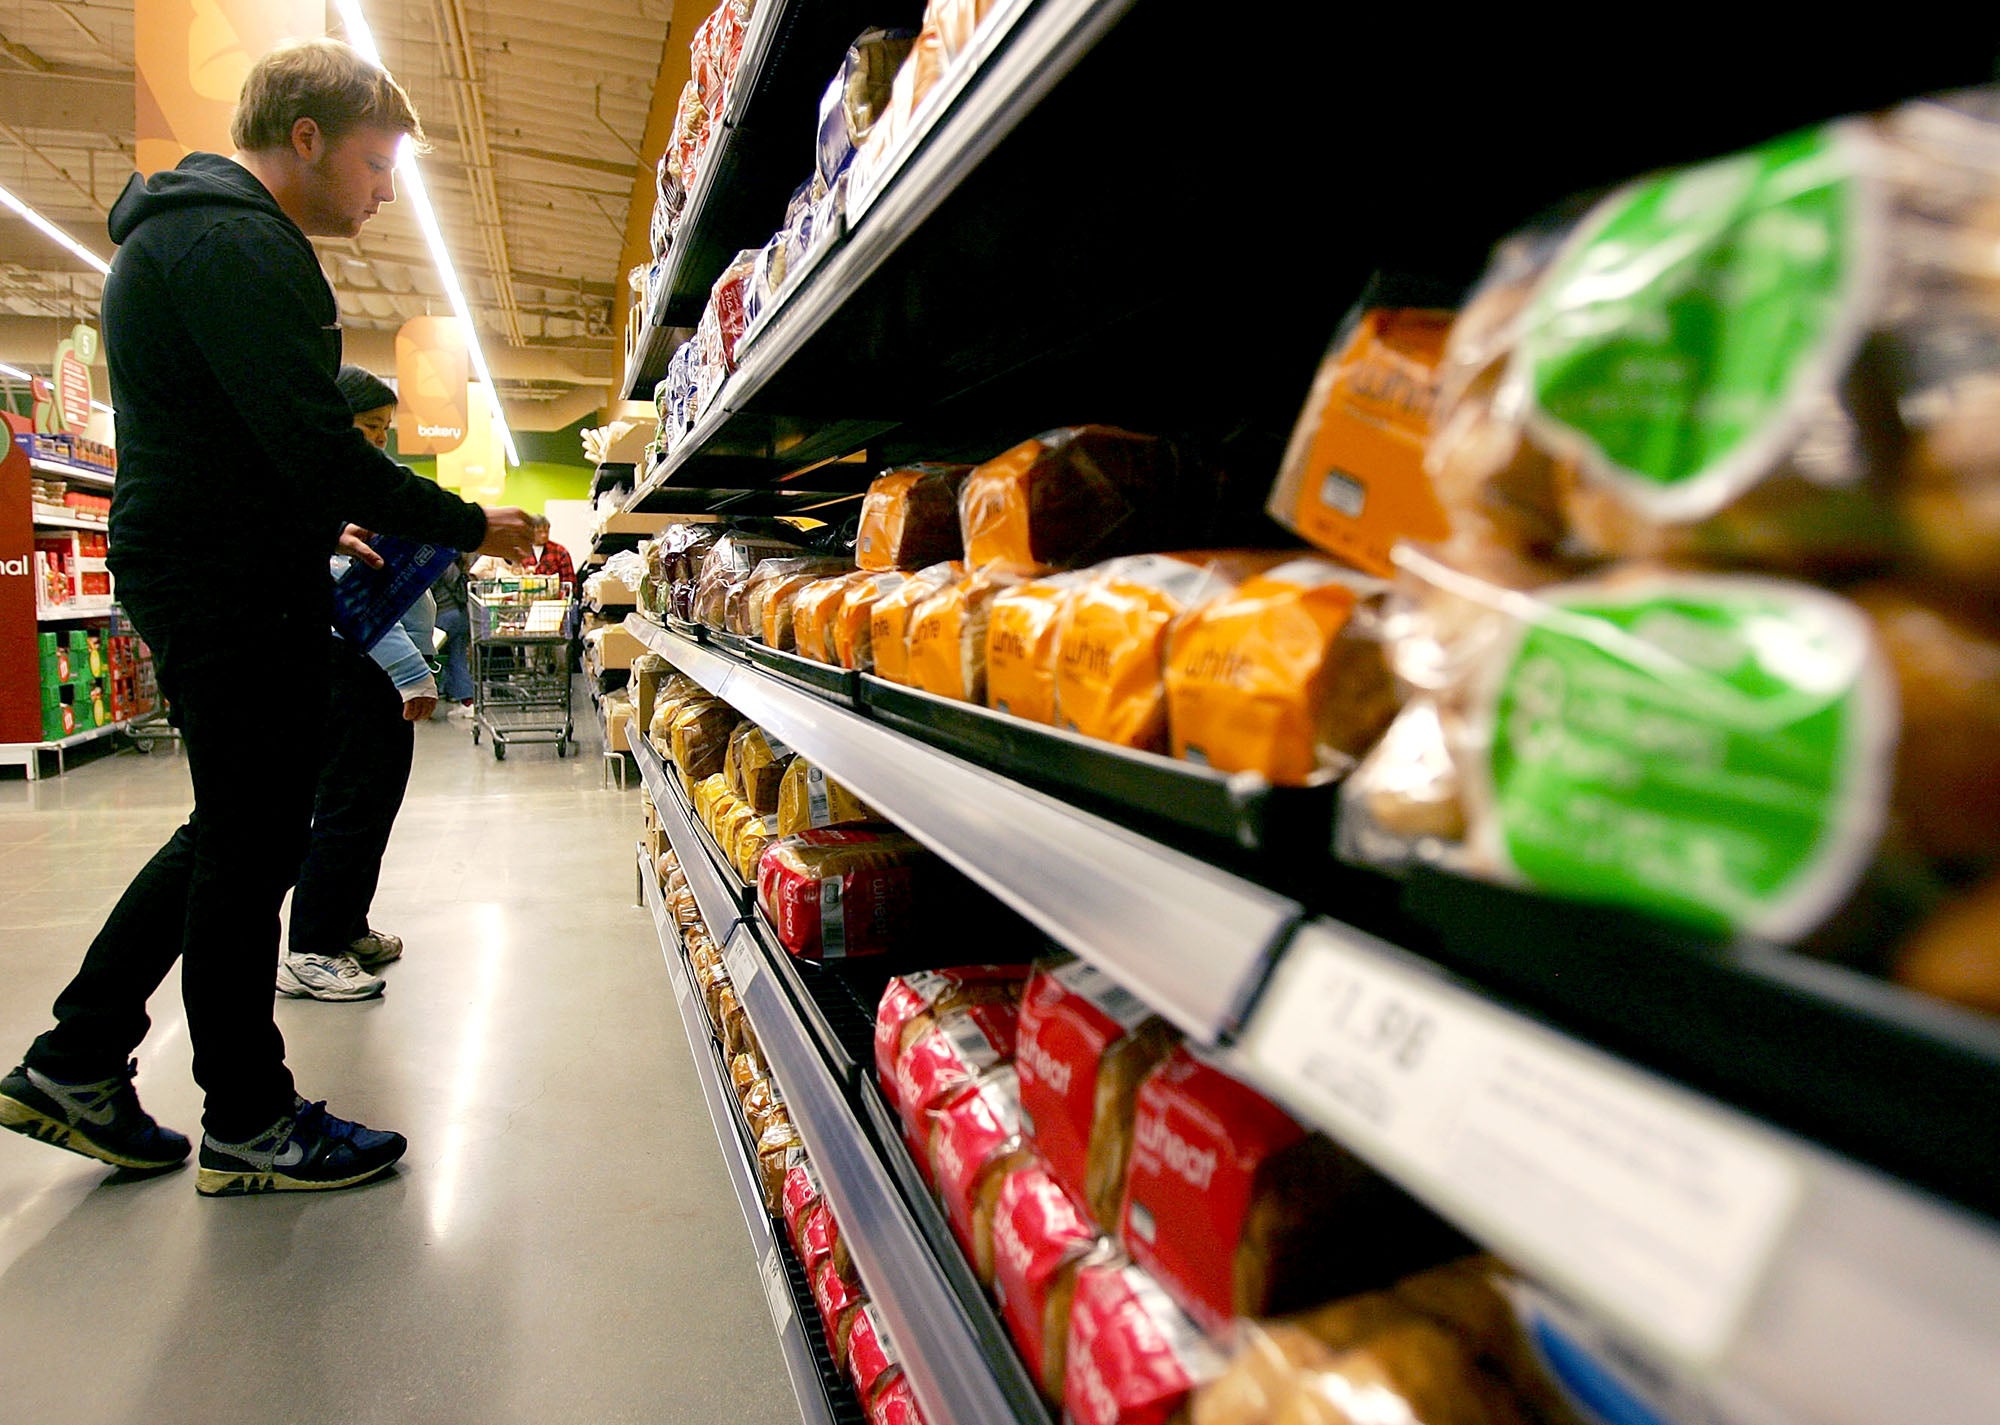 A man looking at several shelves of bread at a grocery store